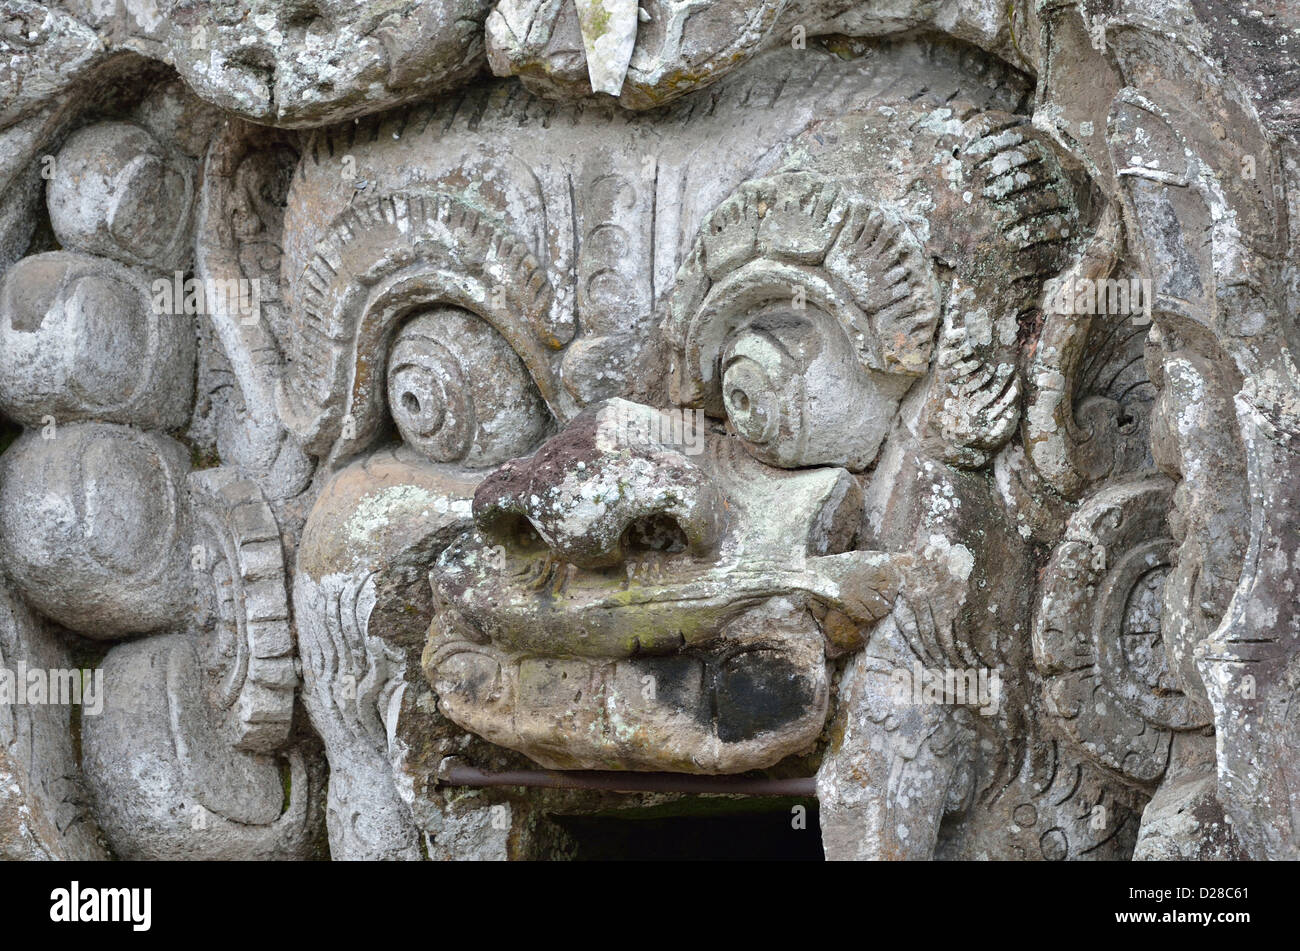 The entrance of the Elephant cave in the hindhu temple of Goa Gajah in Ubud; Bali, Indonesia. Stock Photo